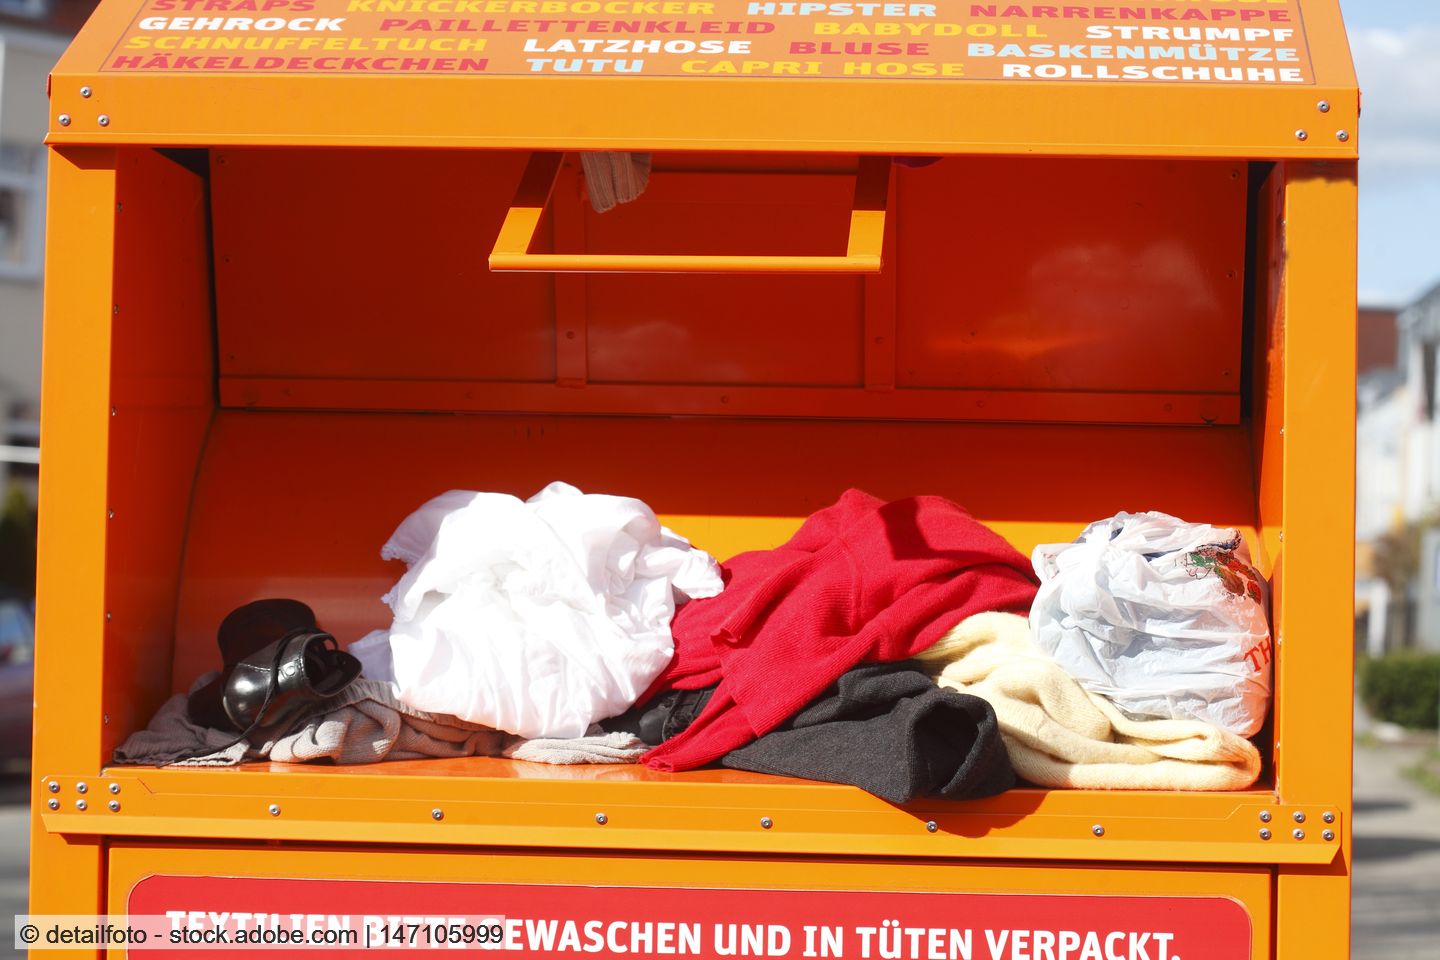 Textiles recyclers unusually pessimistic in Germany